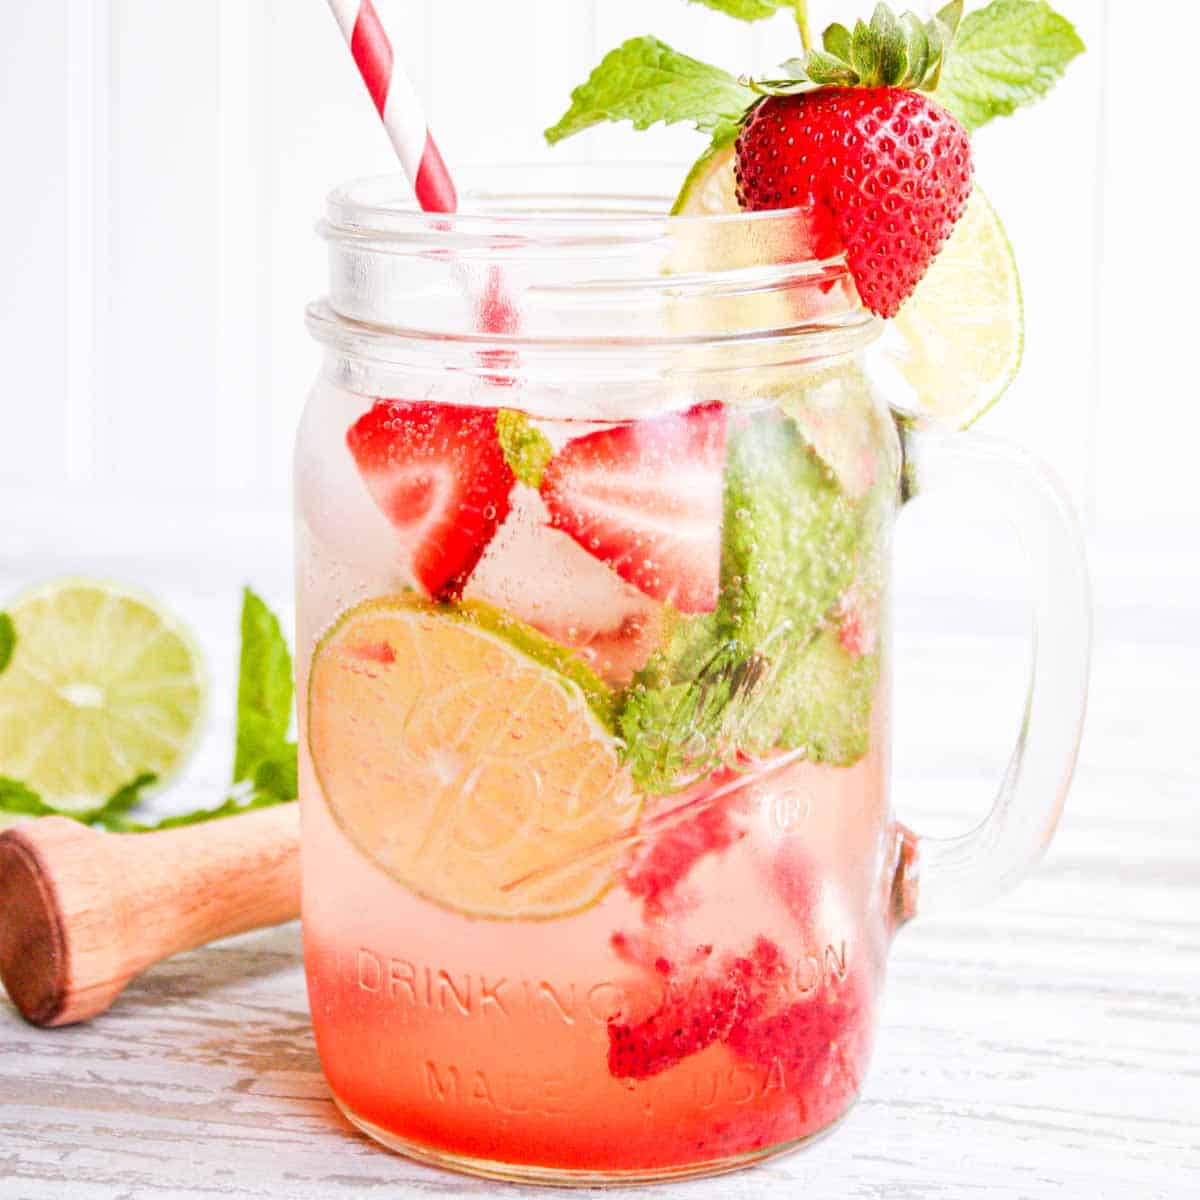 Strawberry lemonade in a mason jar with limes and strawberries.